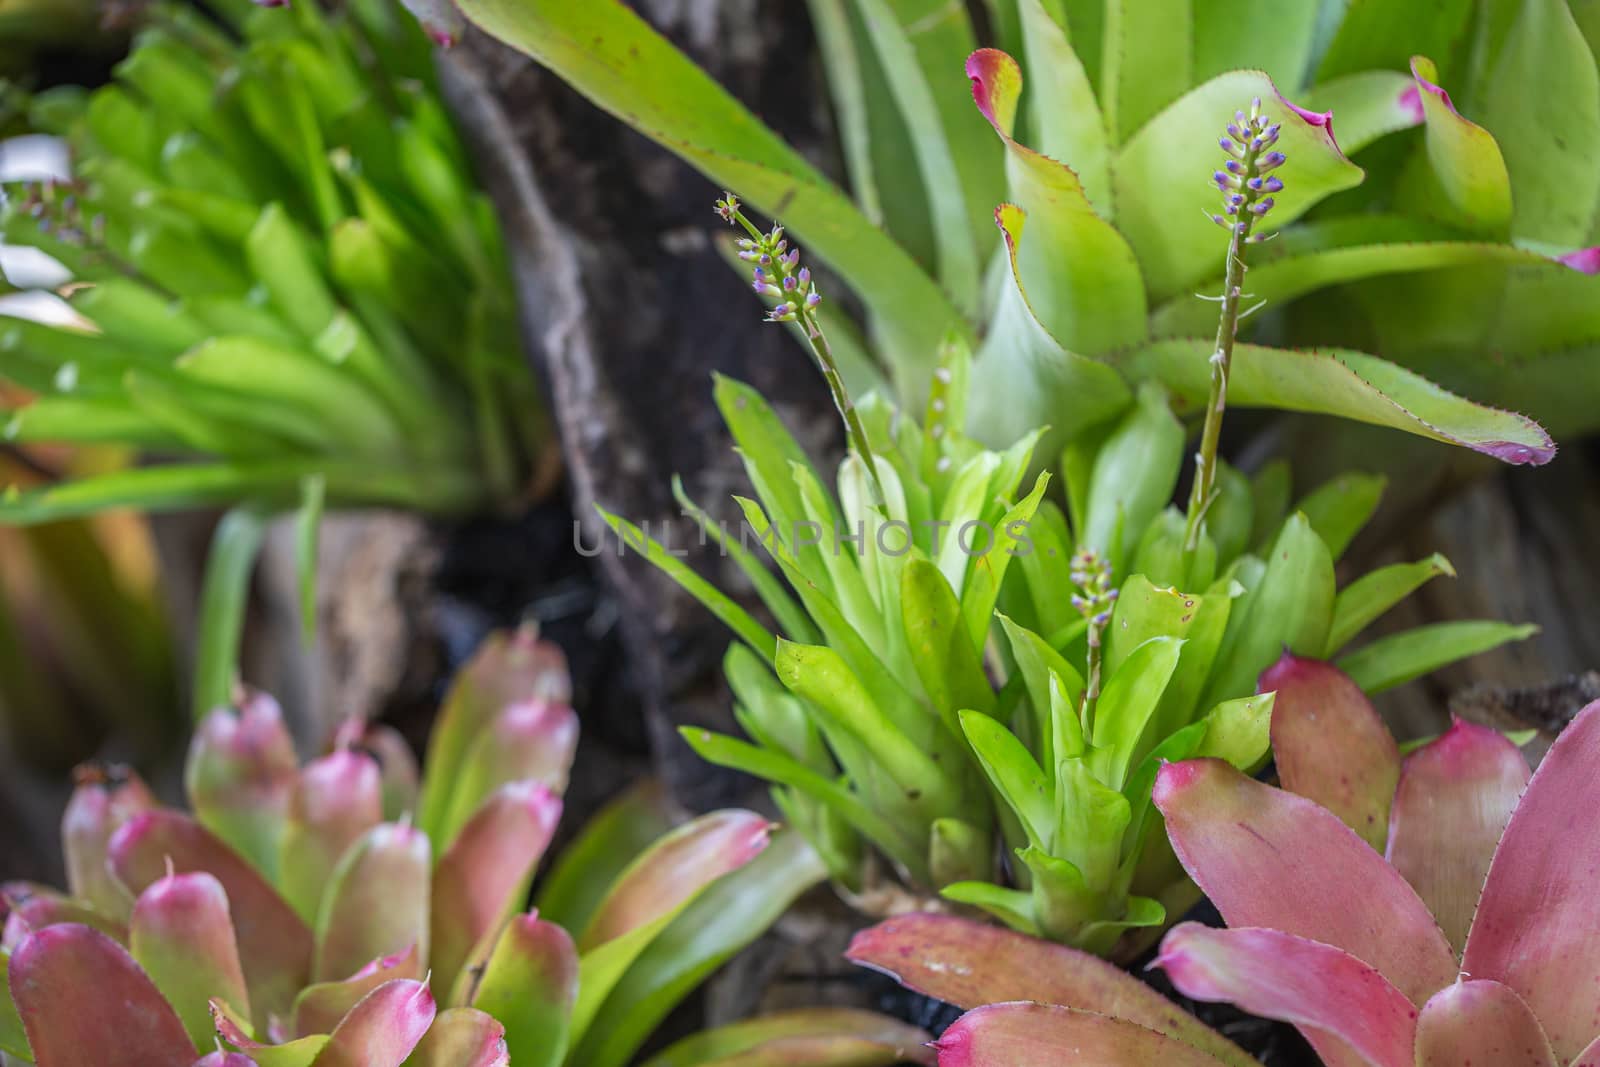 Bromeliad in various color in garden at sunny summer or spring day for decoration and agriculture design.